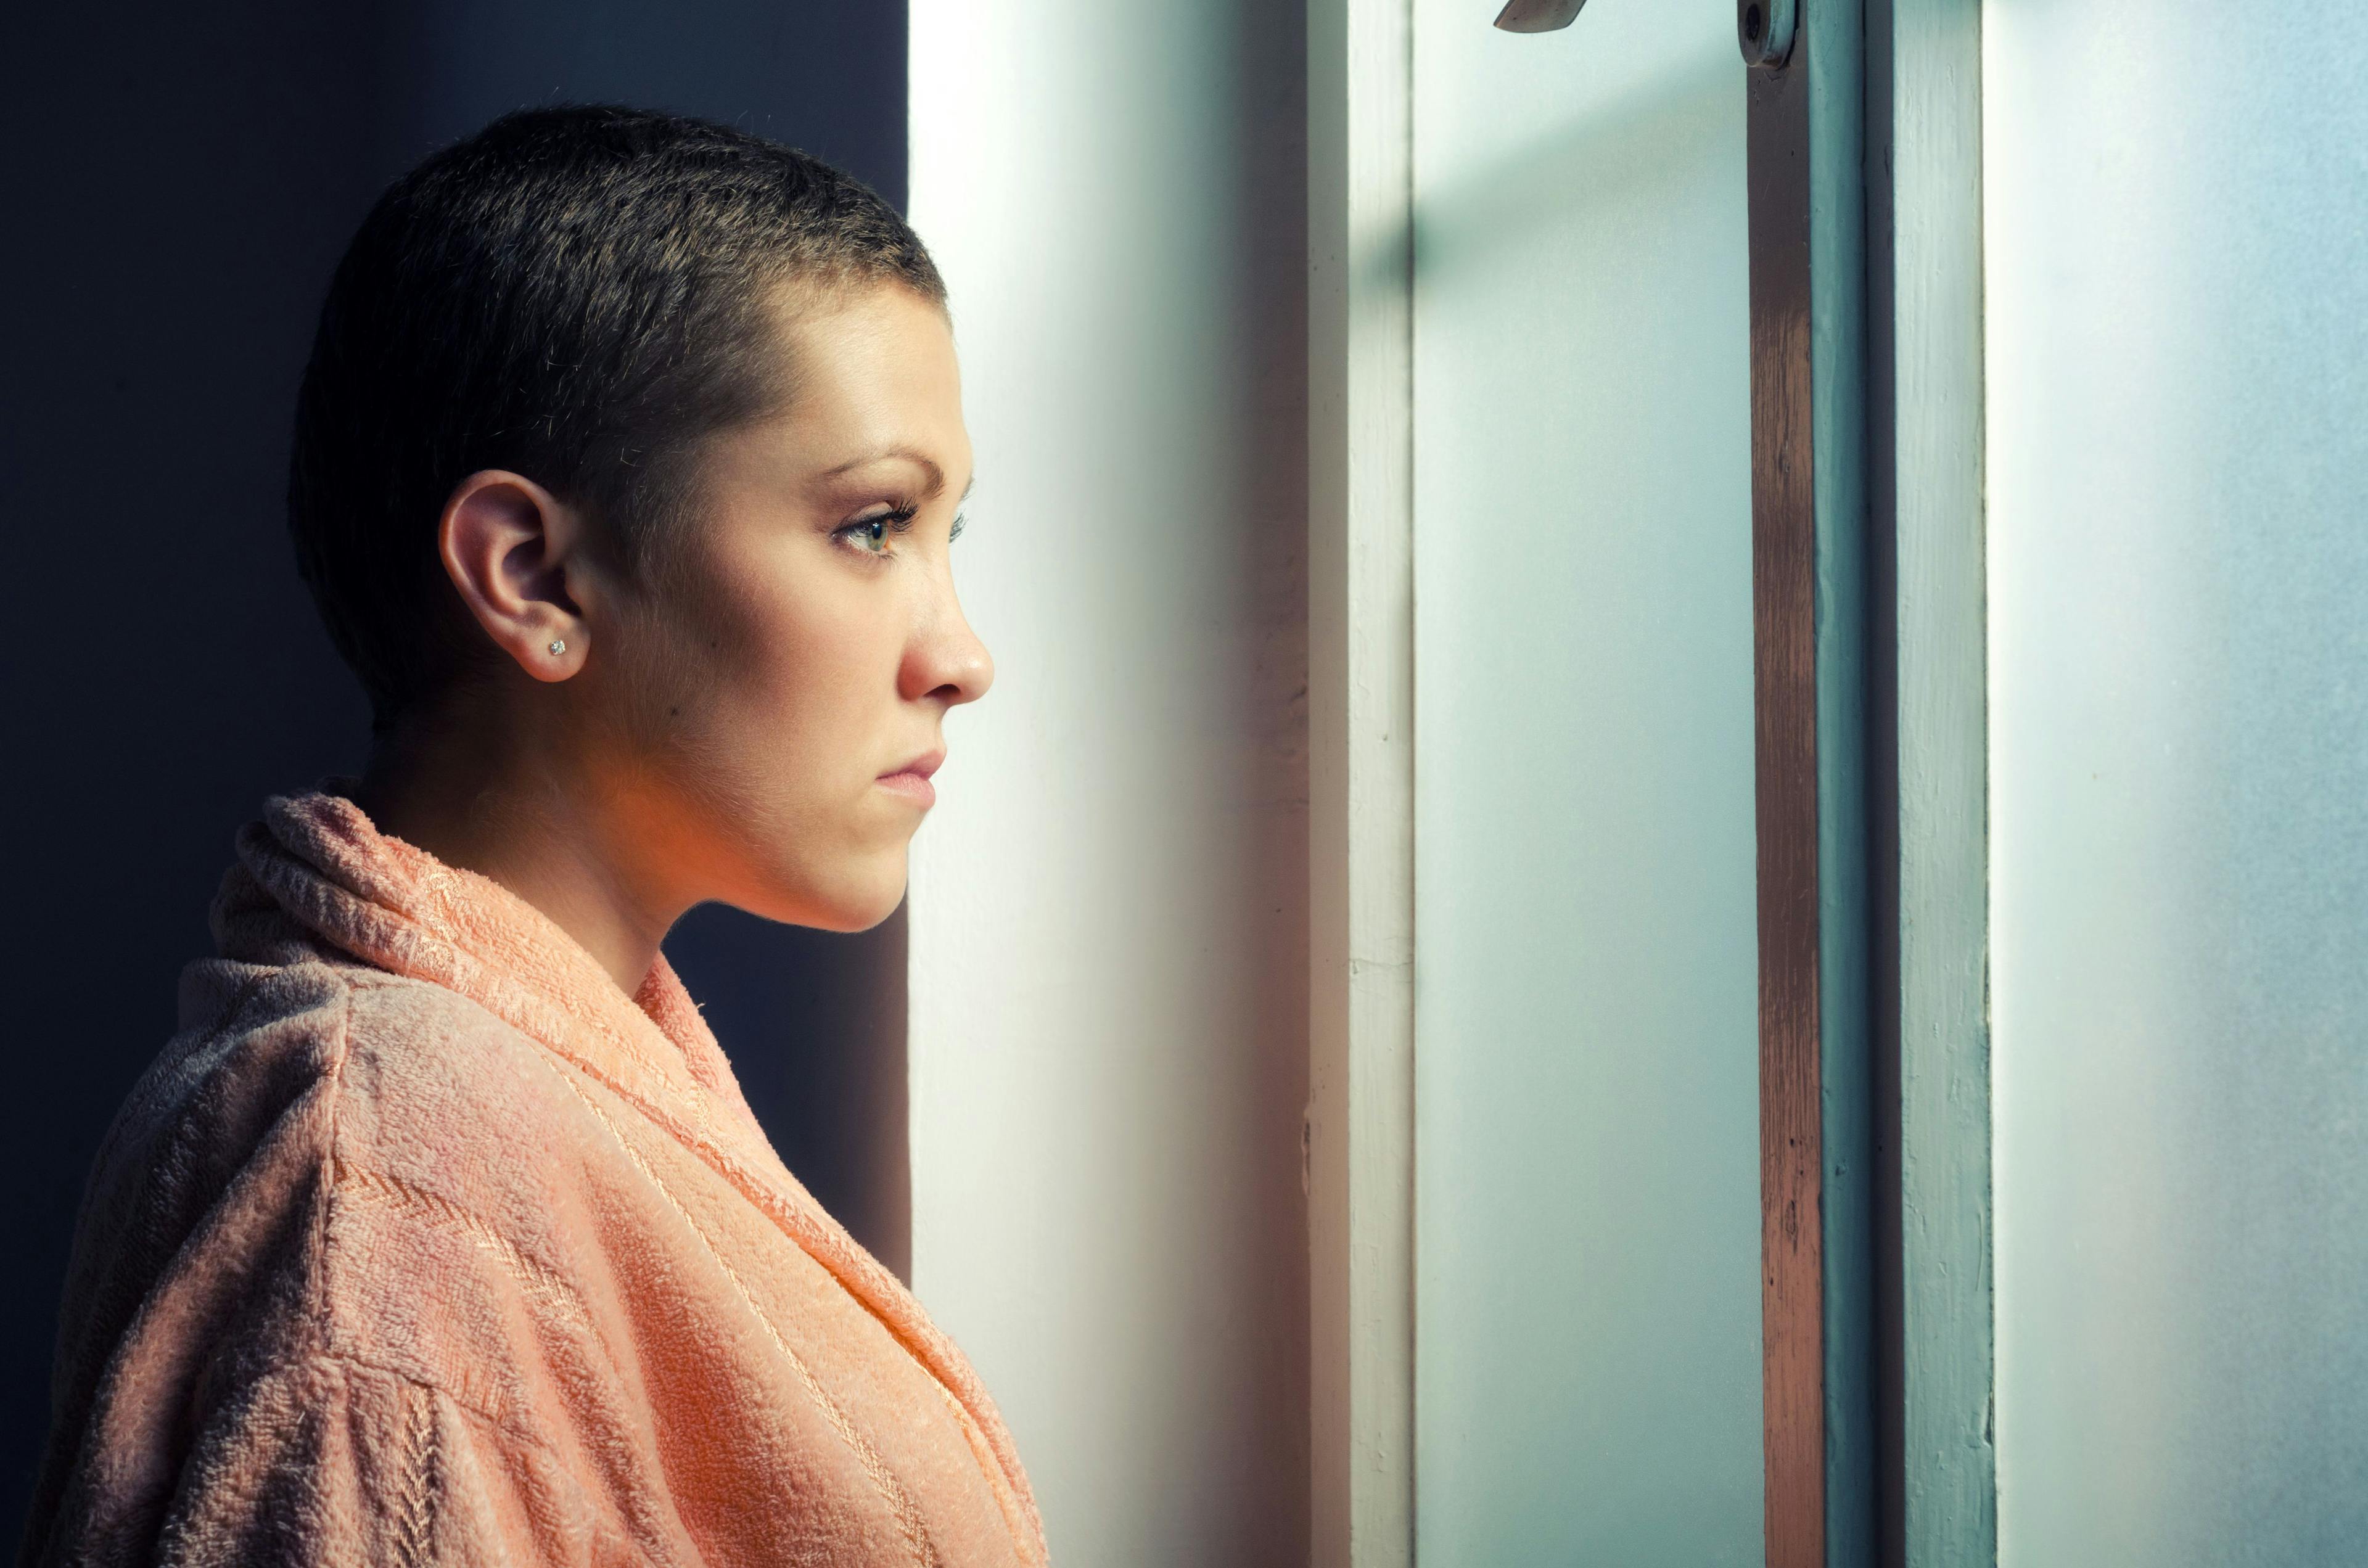 female patient with cancer looking out window